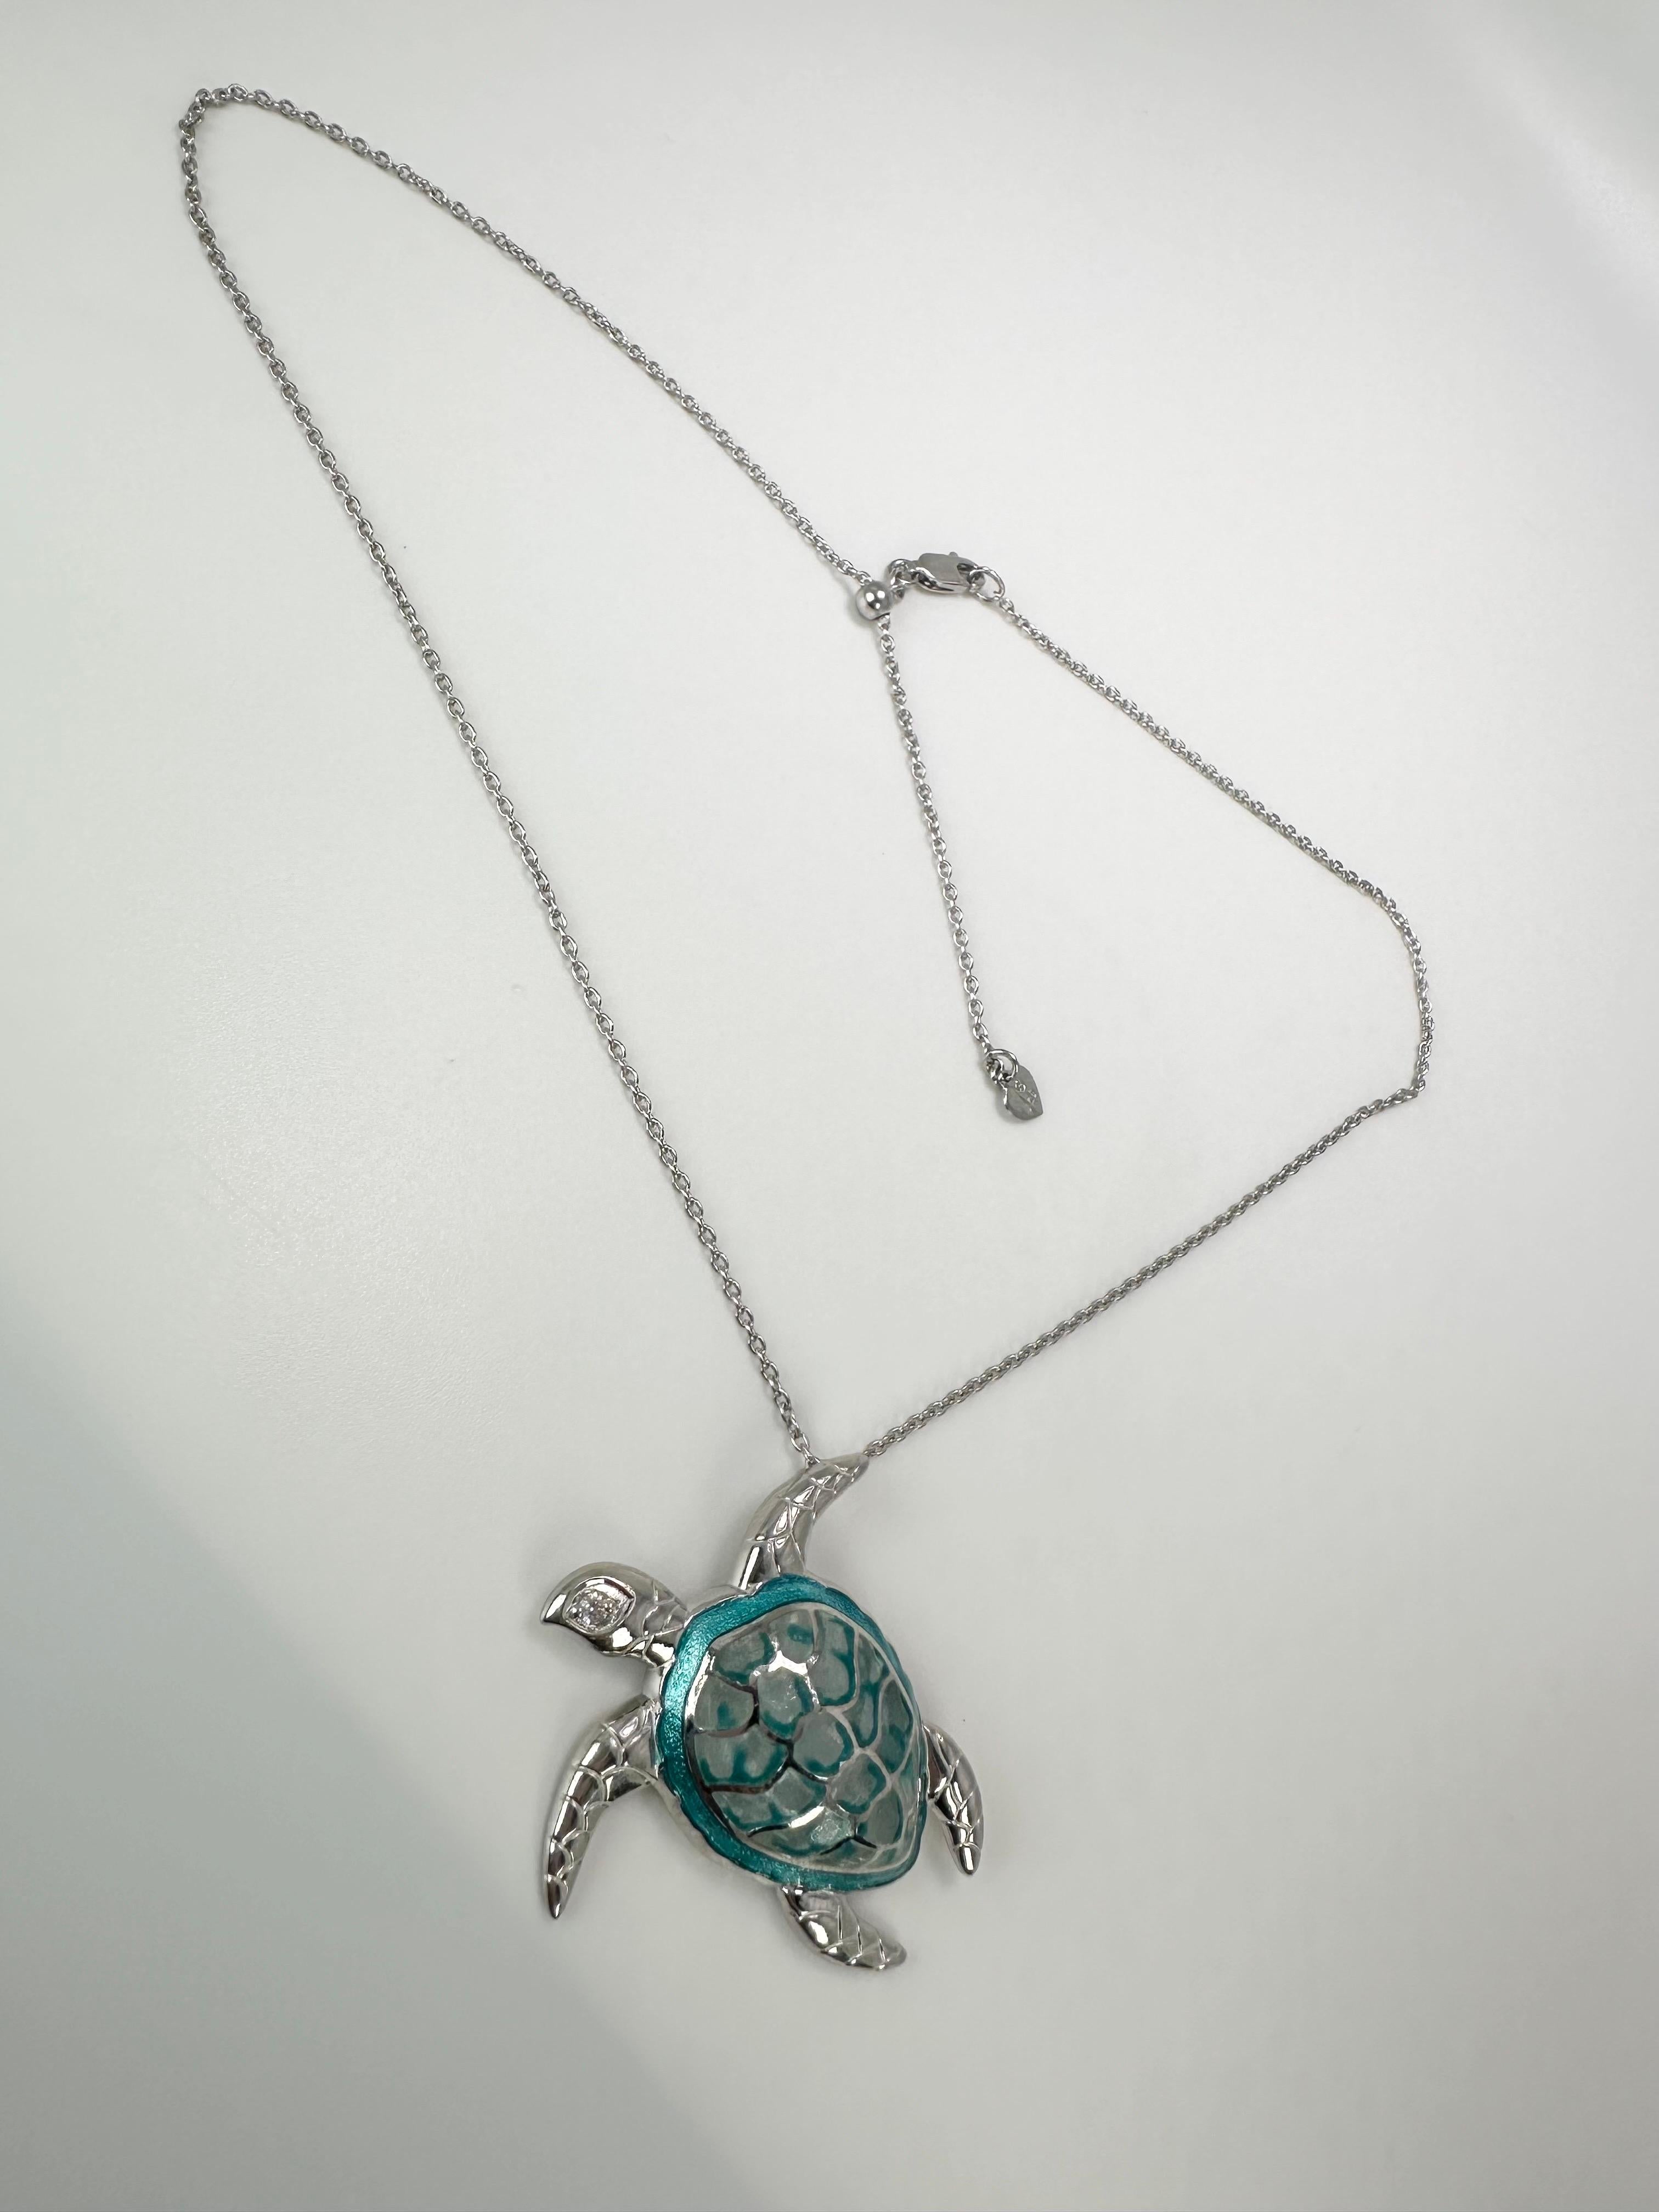 Turtle pendant necklace sea pendant necklace silver 925 In New Condition For Sale In Jupiter, FL